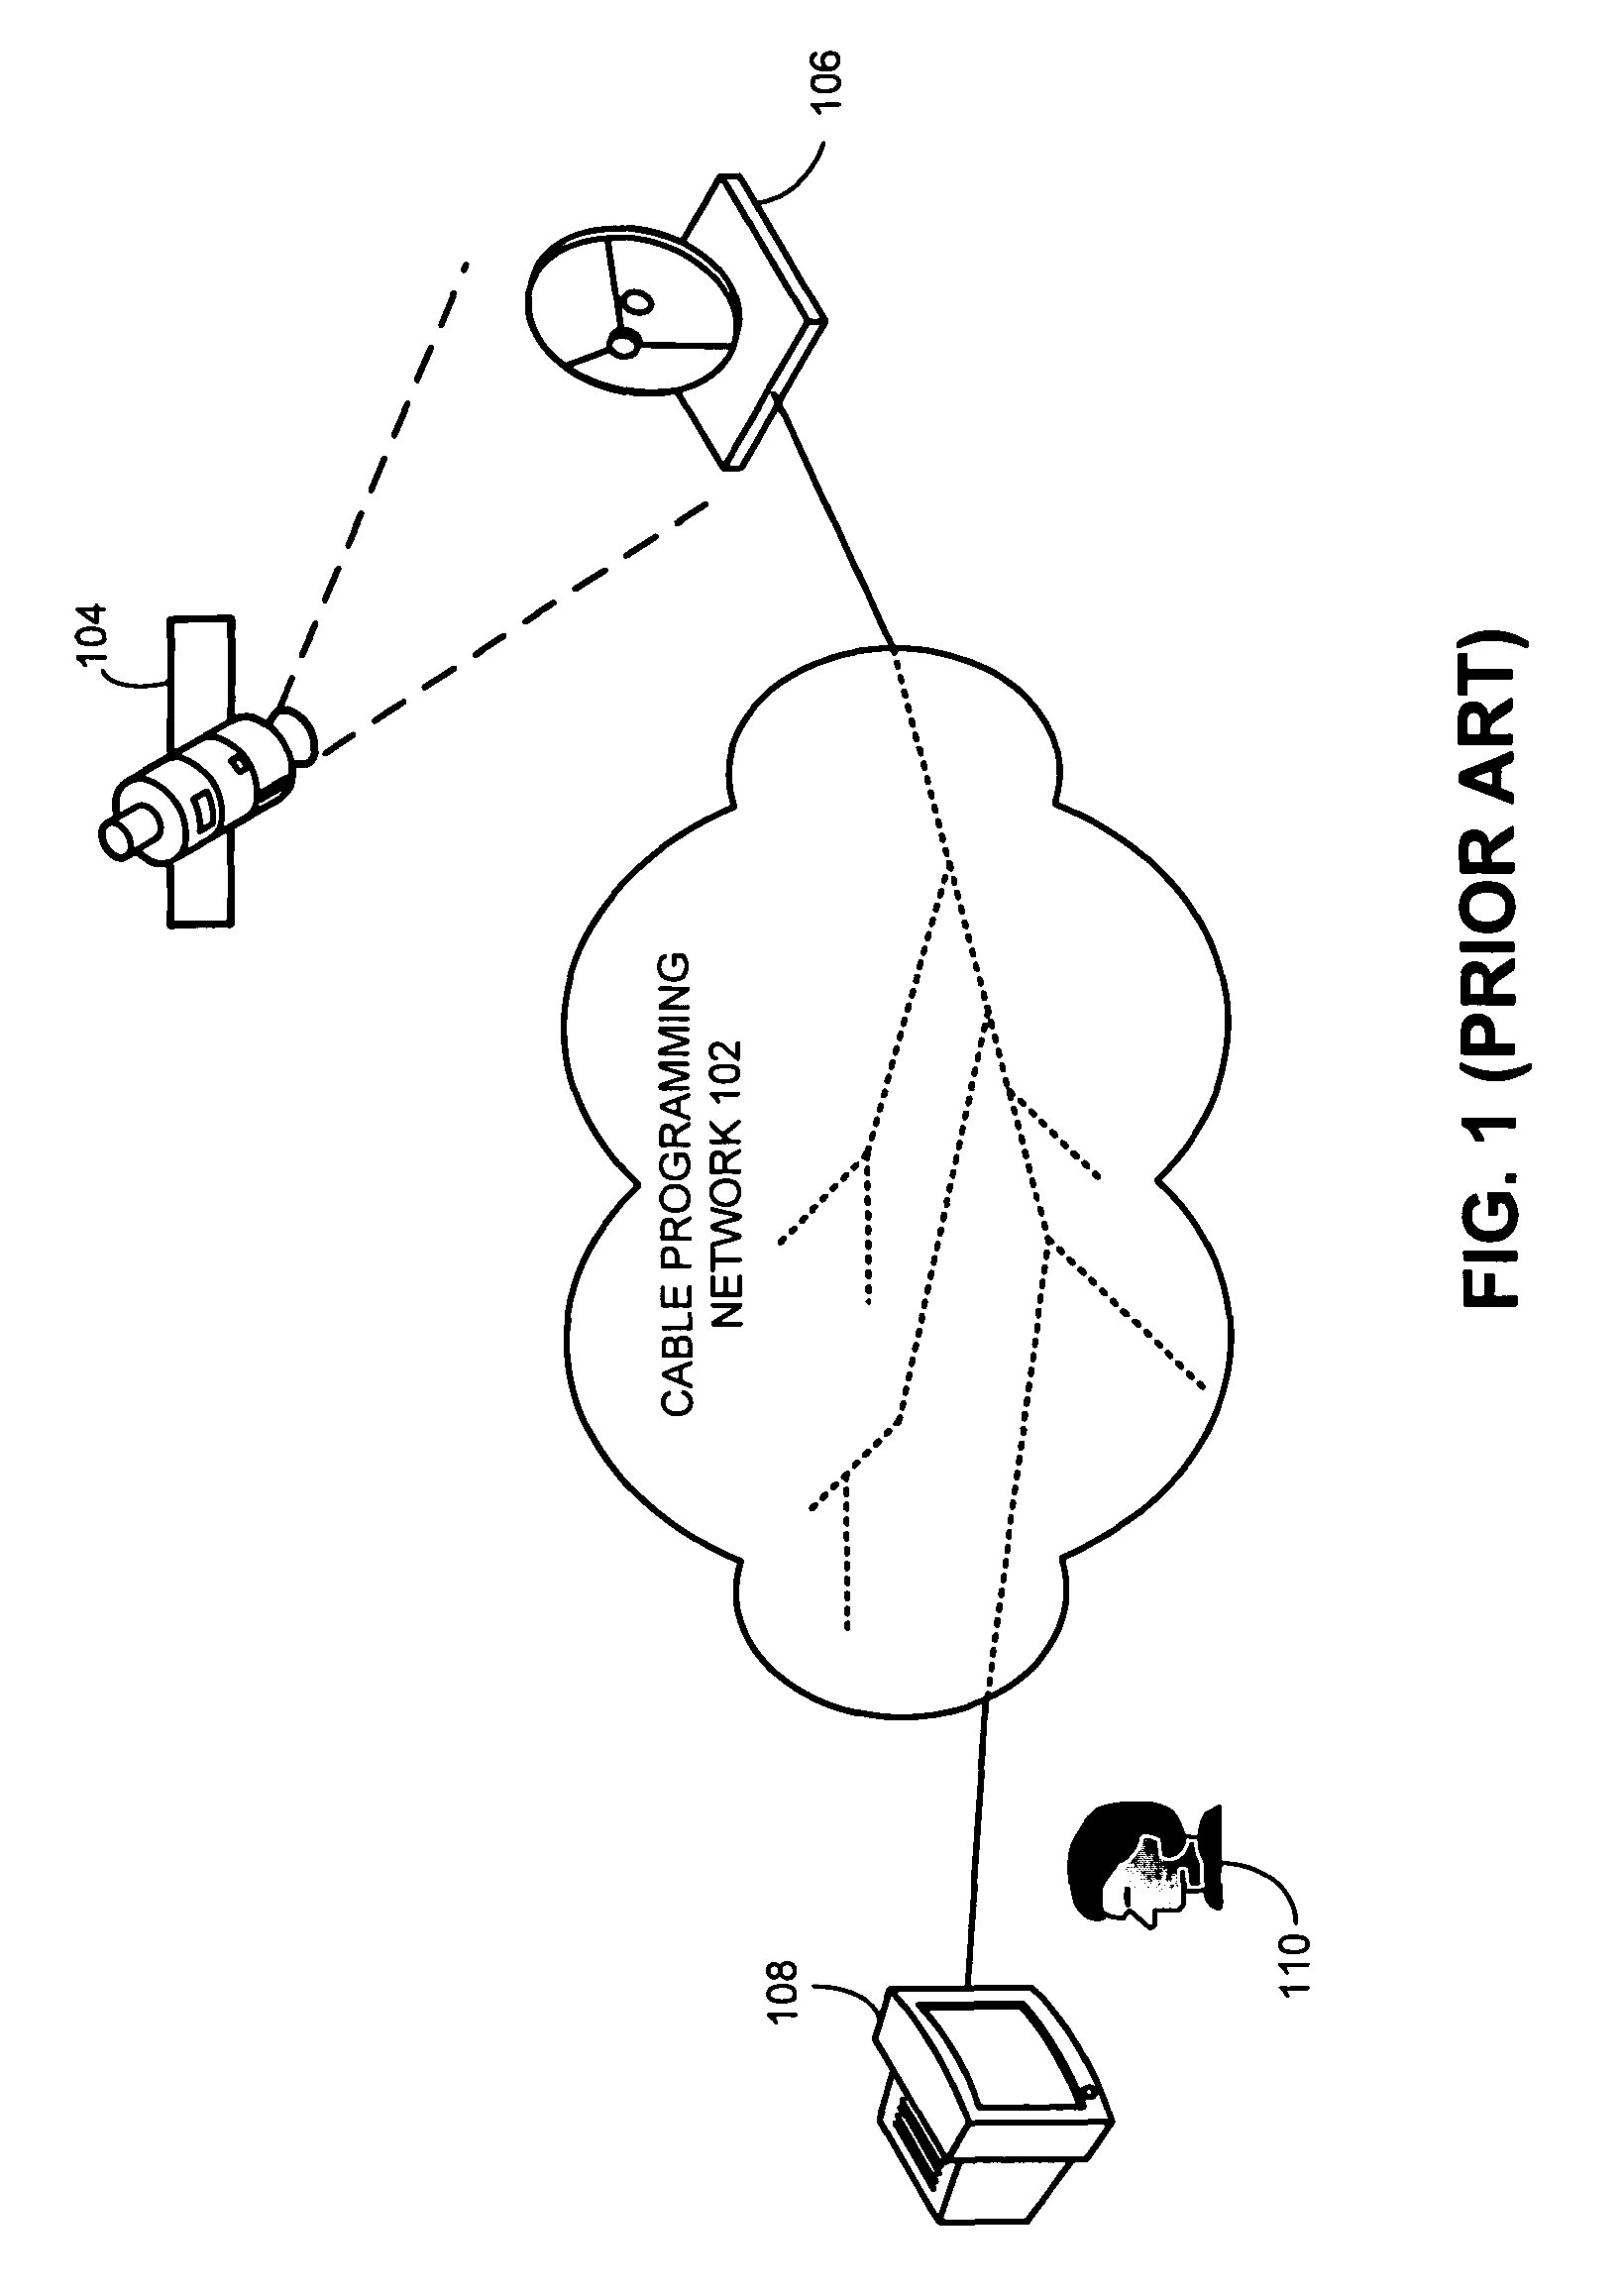 System and method for facilitating a credit system in a peer-to-peer content delivery network